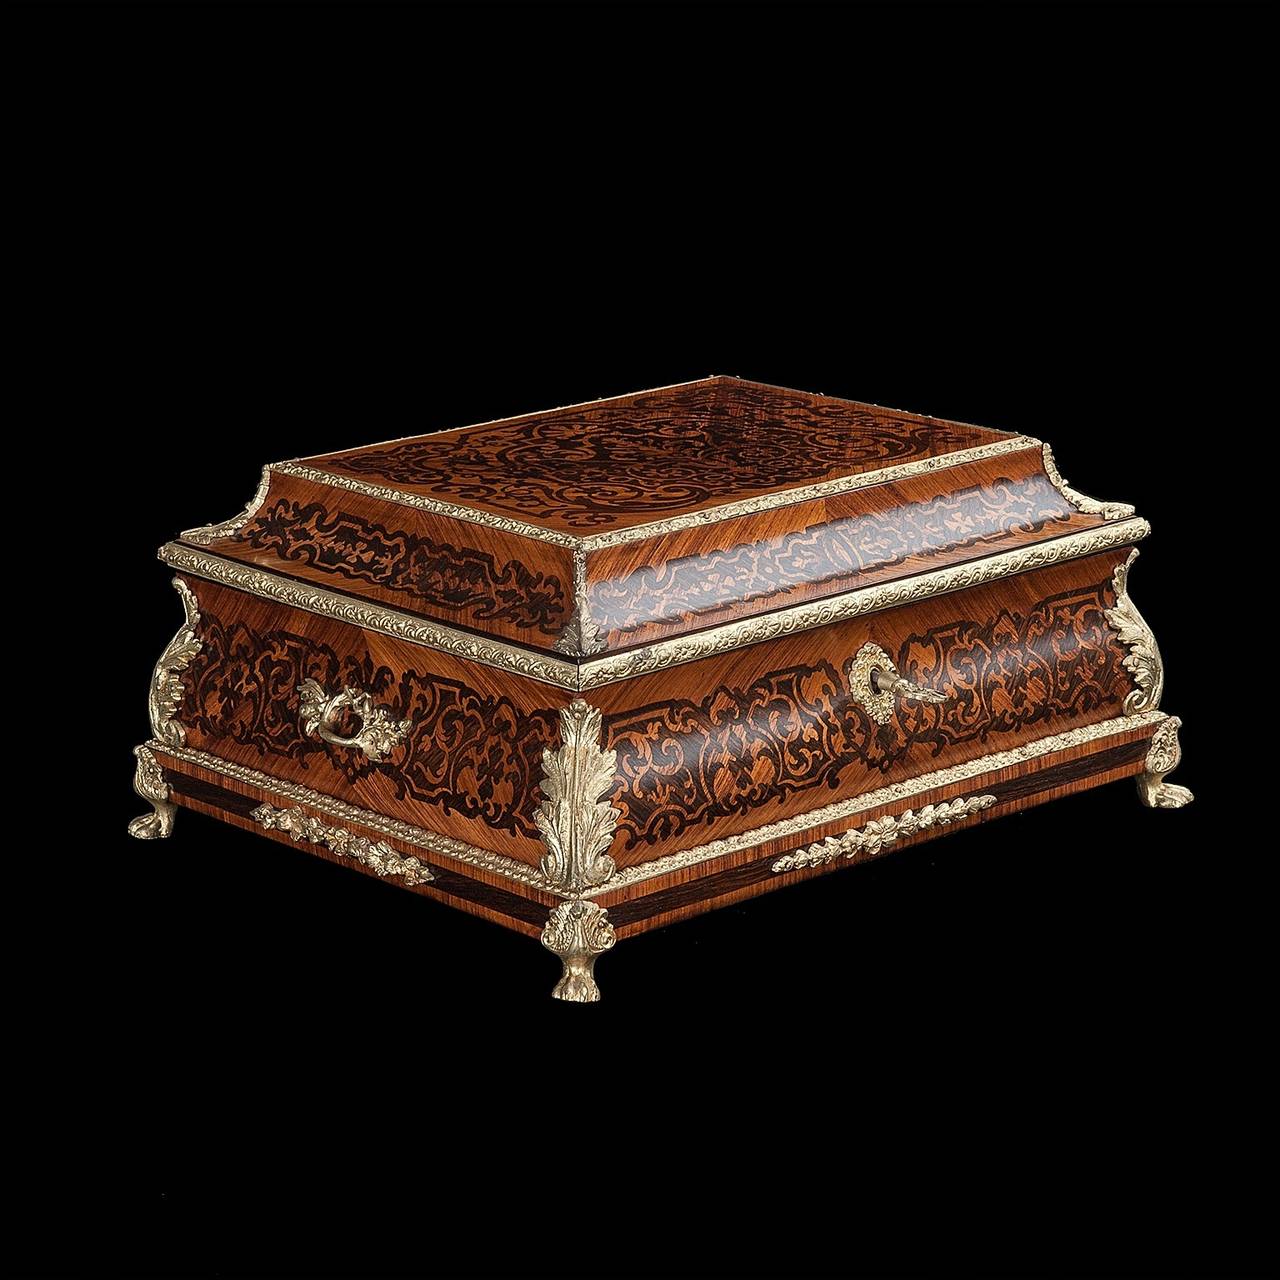 Wooden marquetry jewelry box. Acacia and ebony wood. Richly bronze gilded around all four sides, inside red satin finishing.